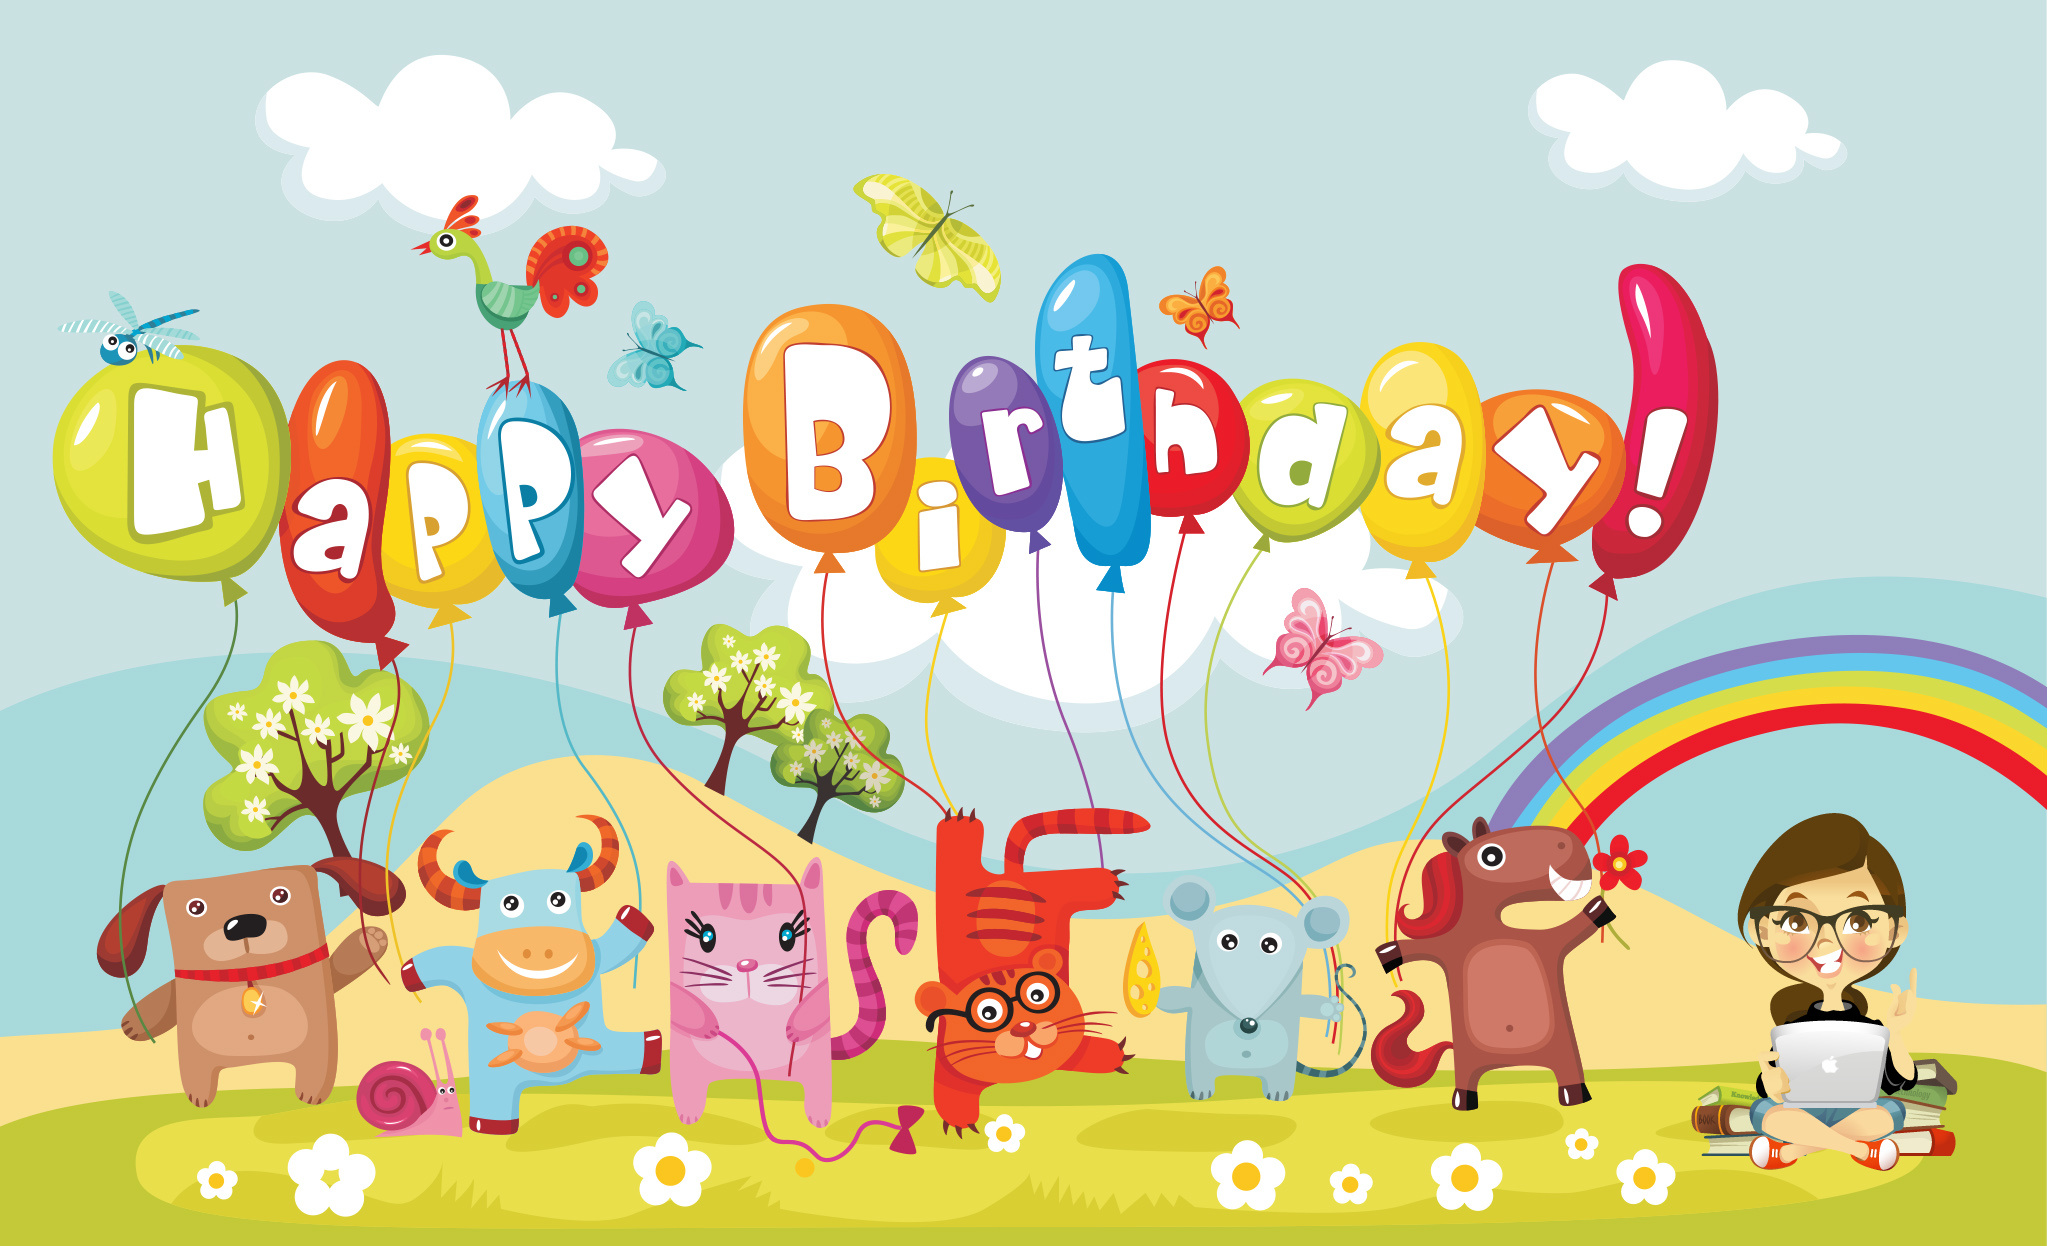 Meaningful Birthday Poems That Can Make Your Friends - Happy Birthday Cartoon Hd - HD Wallpaper 